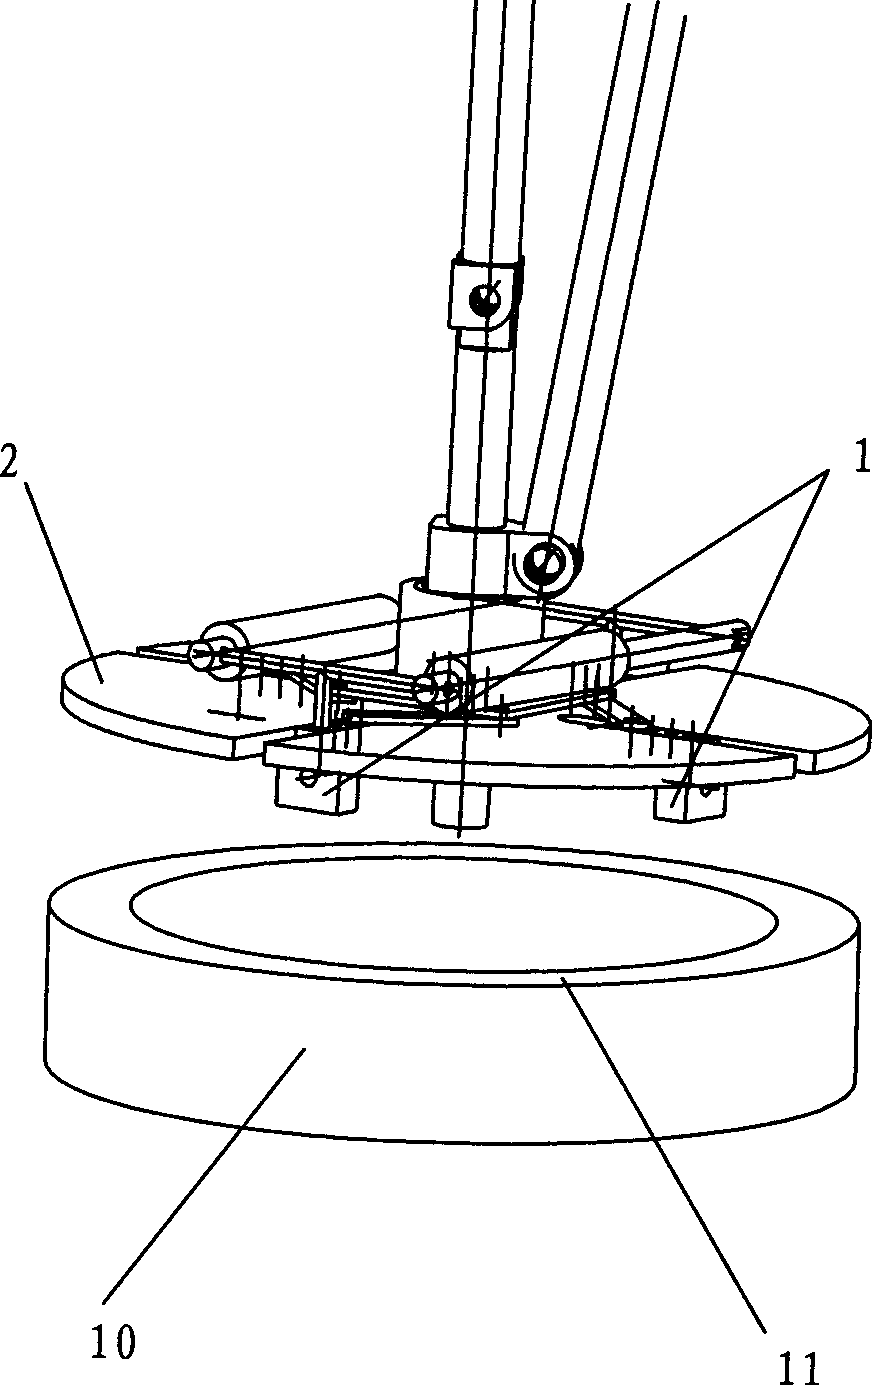 Flywheel casing on-line rapid assembling device and method